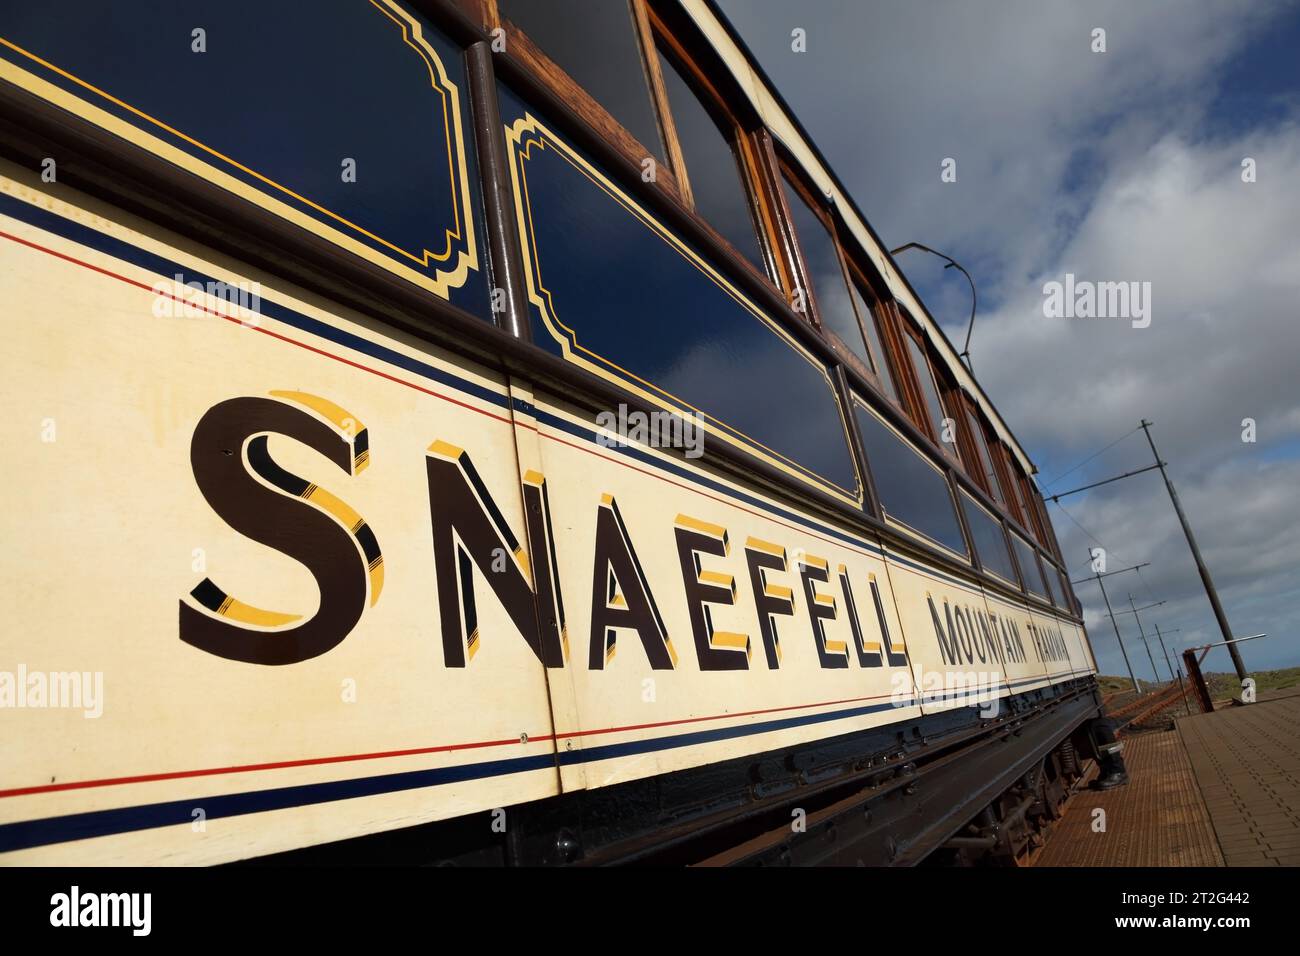 Snaefell Mountain Railway tram number 1 at Snaefell station, Isle of Man. Stock Photo